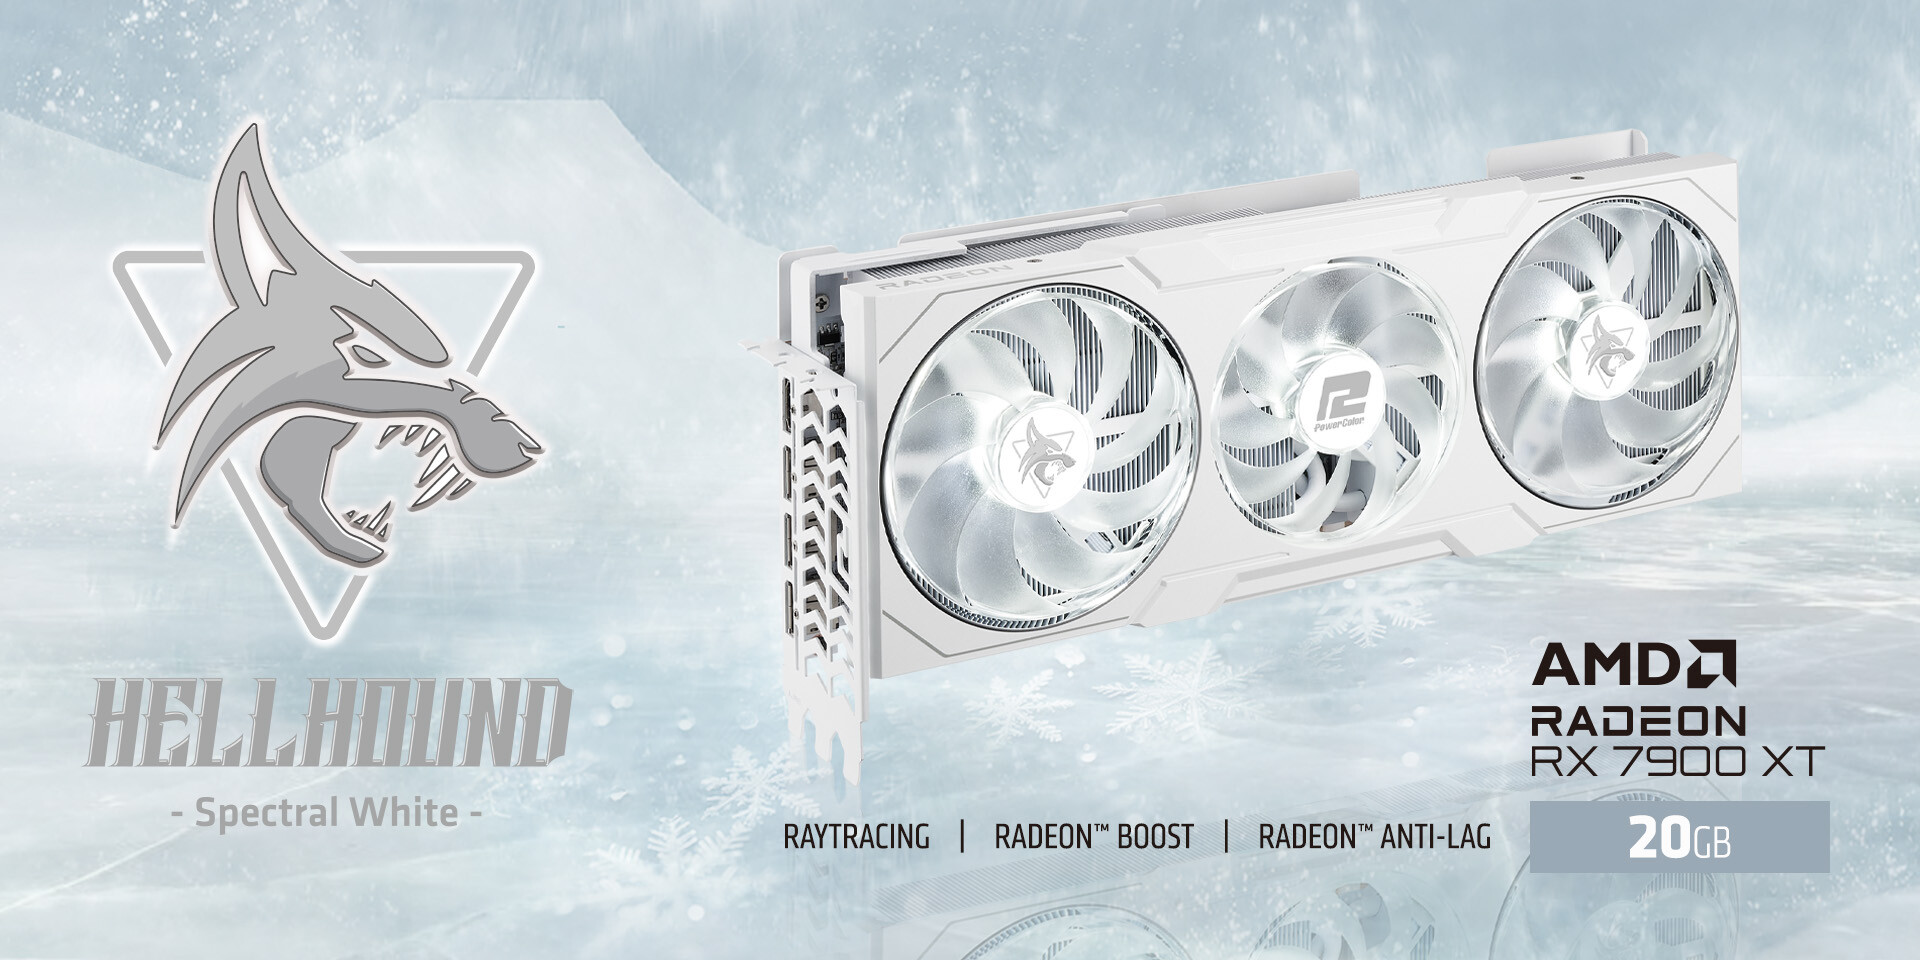 PowerColor introduces Spectral White Edition of Radeon RX 7900 XT Hellhound